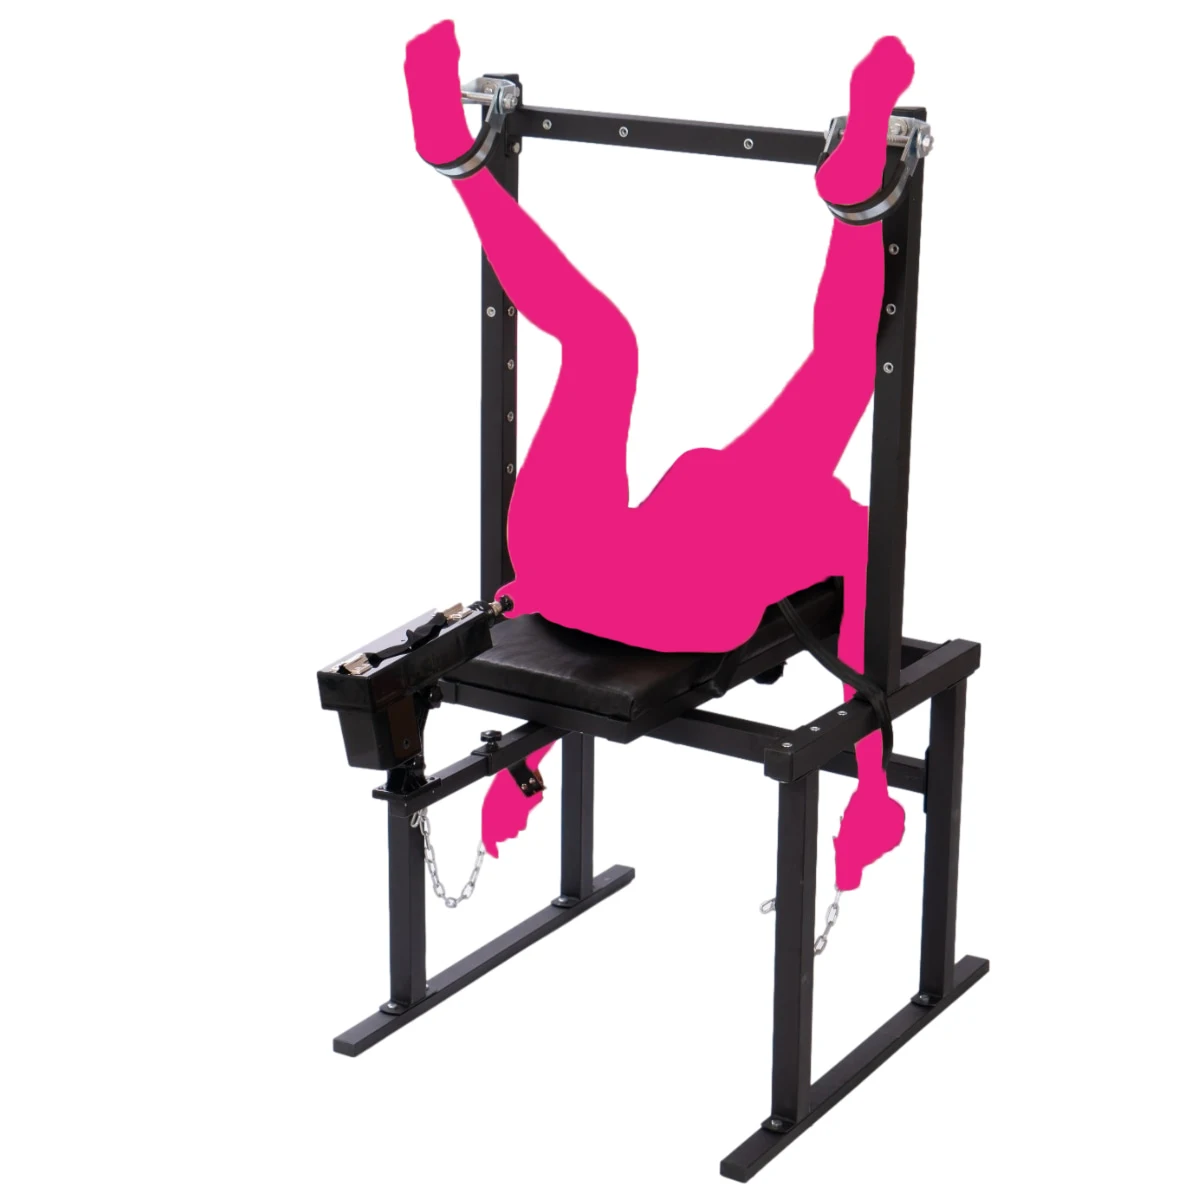 Sm Frame Sex Machine Chair Bondage Toys Husband And Wife Happy Party Restraint Adjustment Props Sex Toys For Women Men Couples - Sex Furniture photo